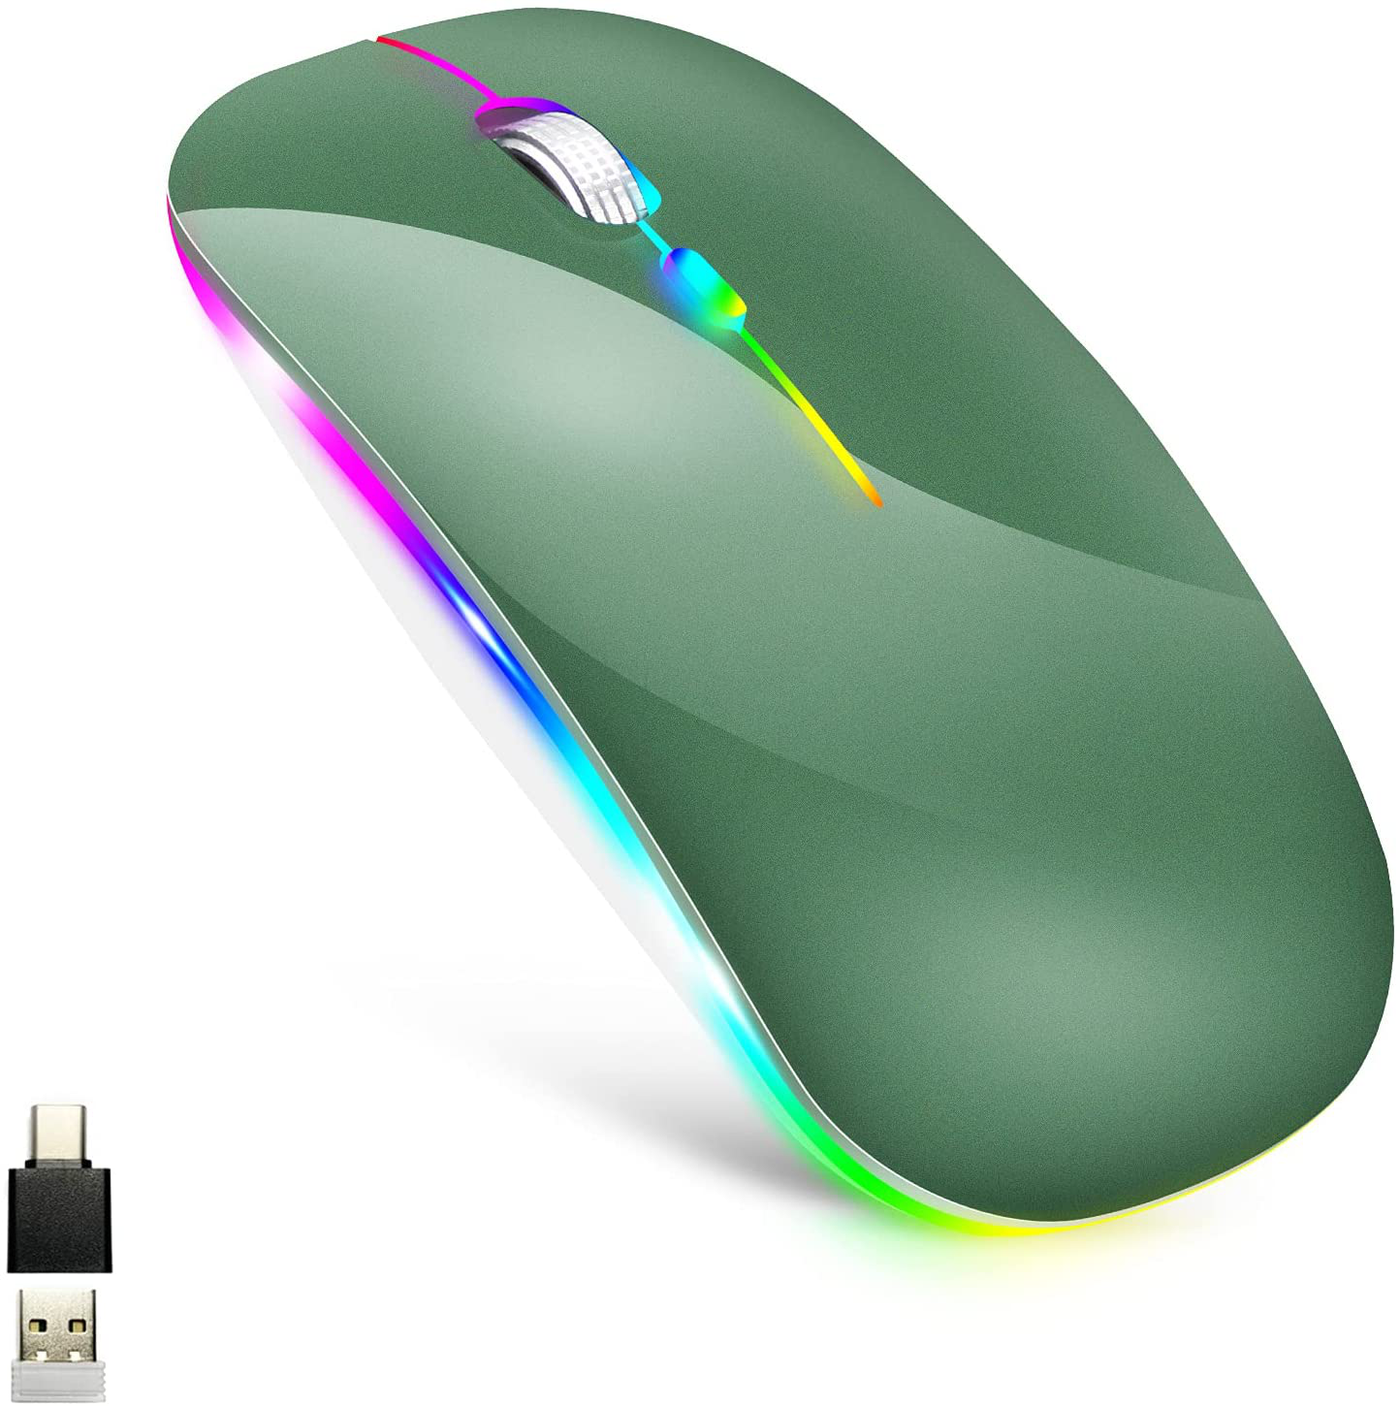 LED Wireless Mouse for MacBook air/MacBook pro/Laptops/Windows/Mac,Rechargeable Slim Silent Mouse 2.4G USB/Type-c Receiver,Rechargeable Wireless Mouse for MacBook/air/pro/mac/pc(Grey)